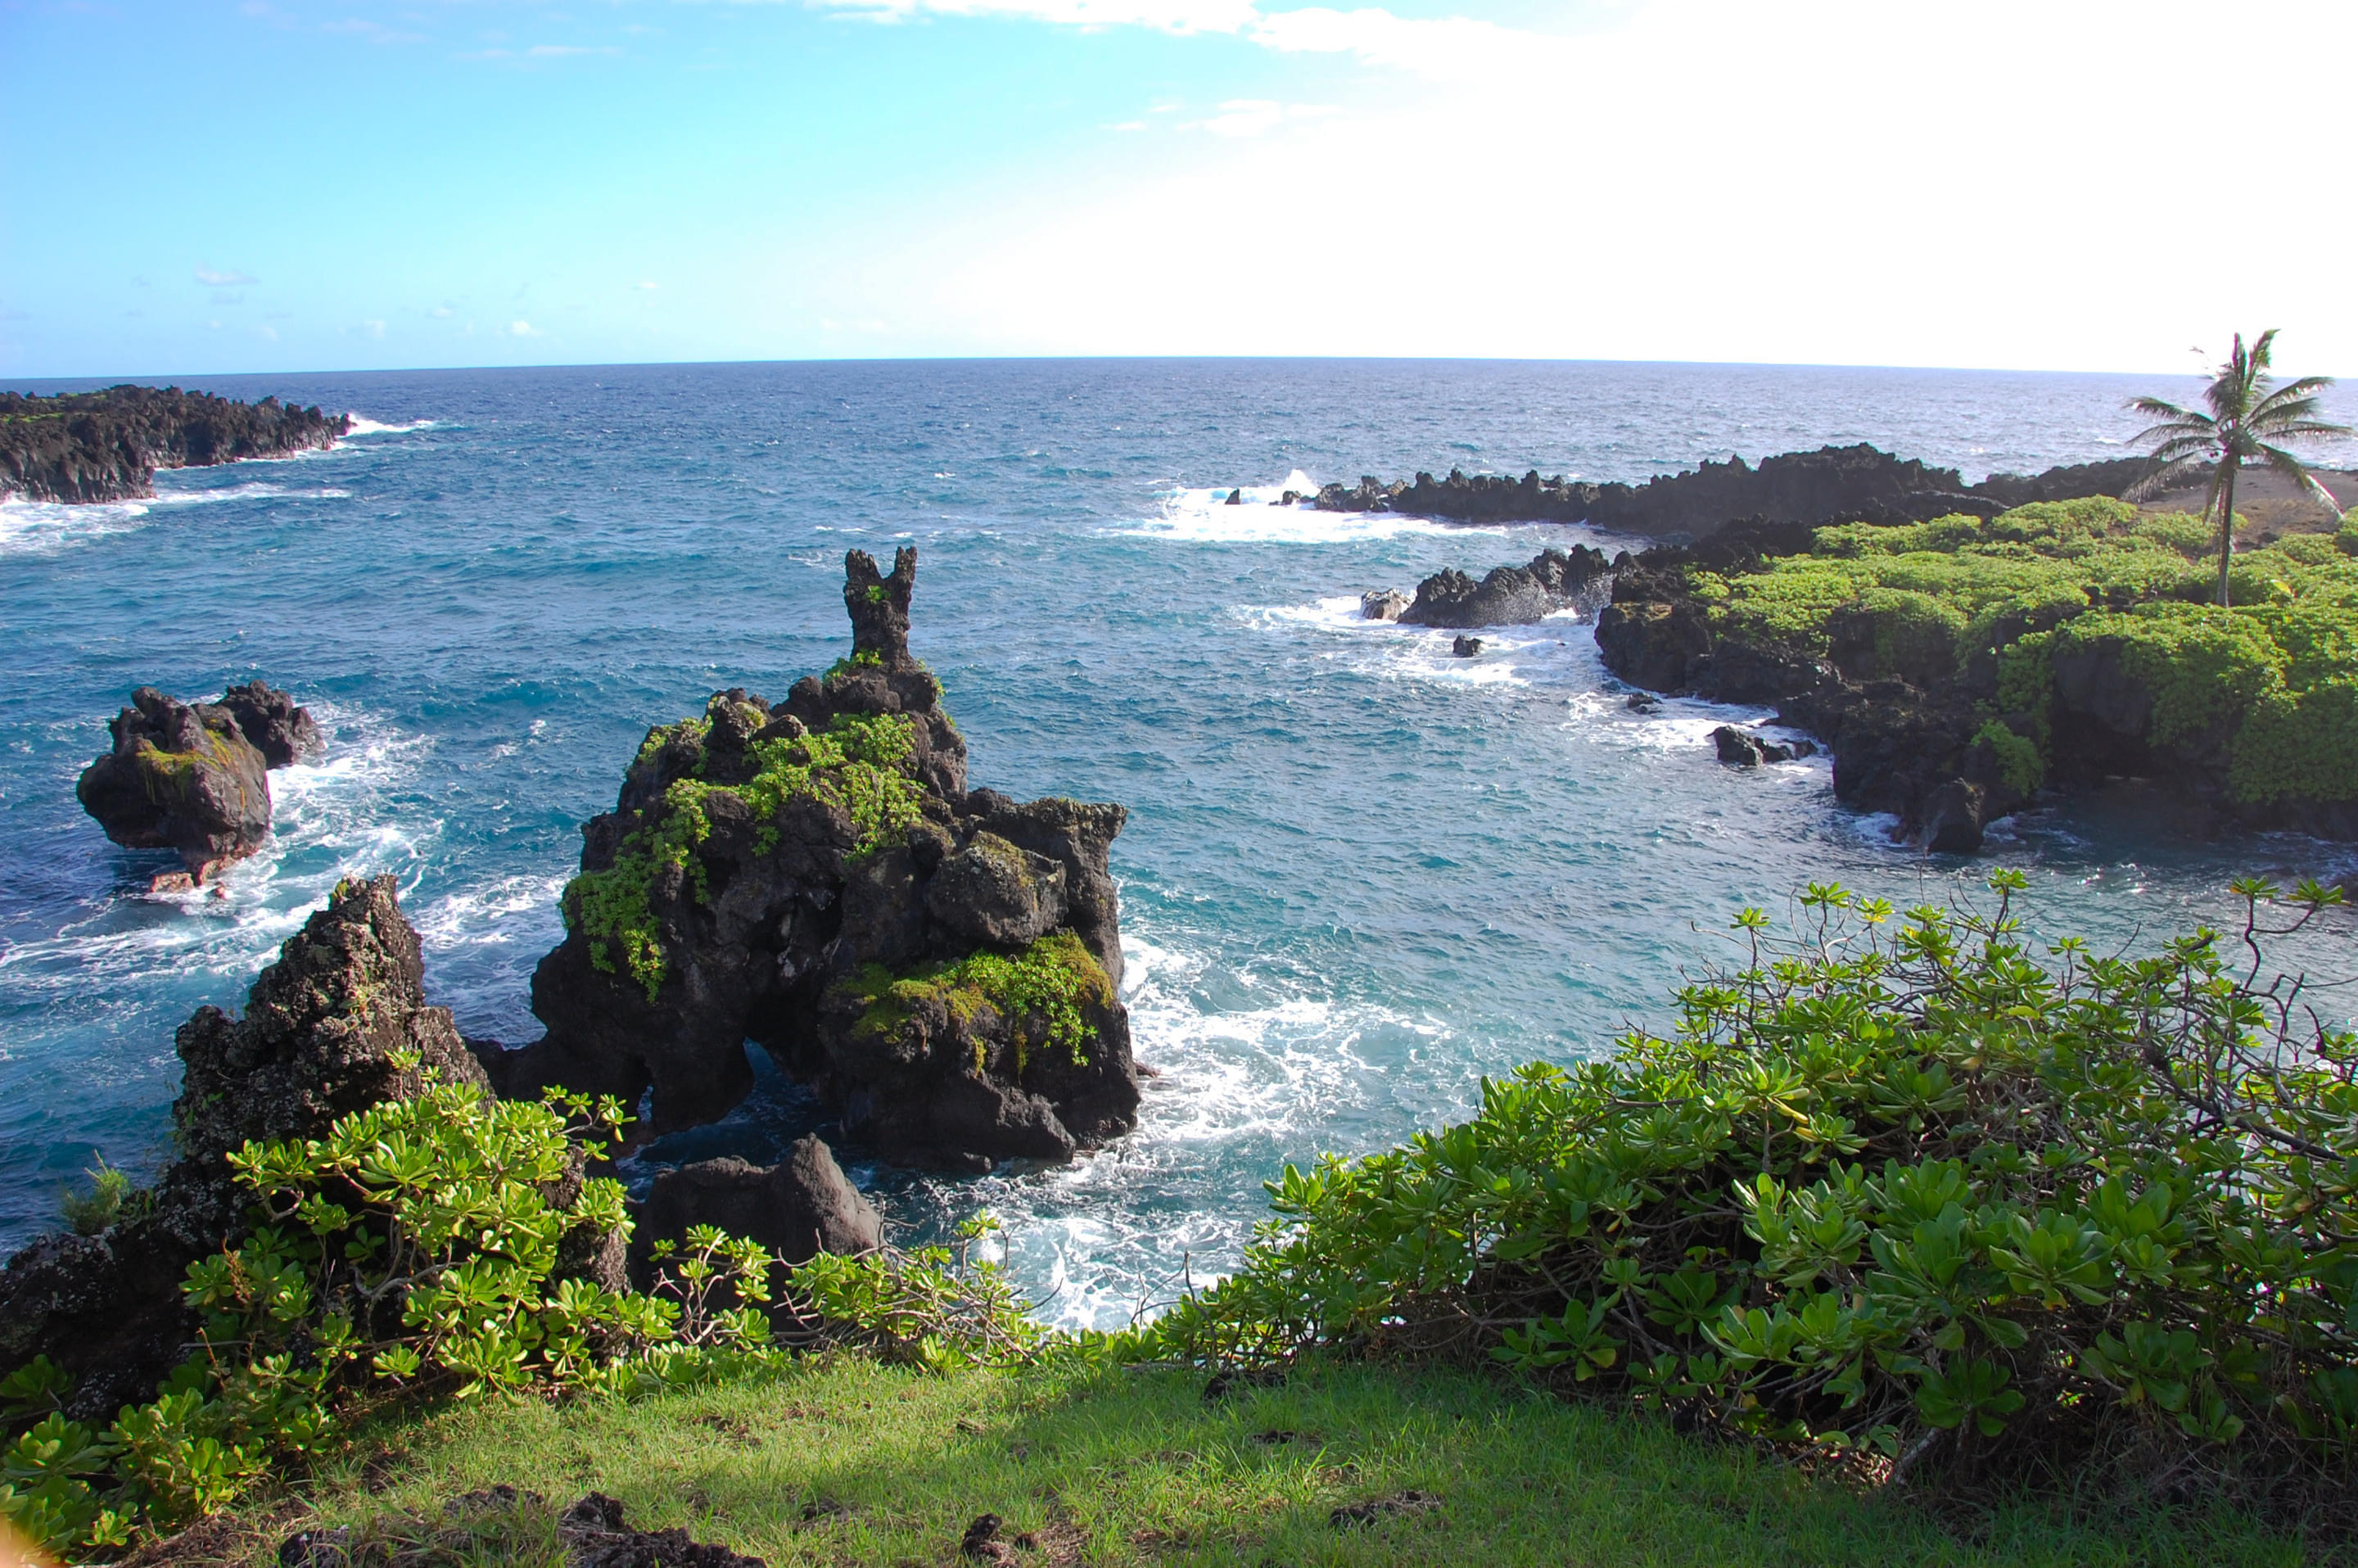 Waianapanapa State Park and Beach Overview